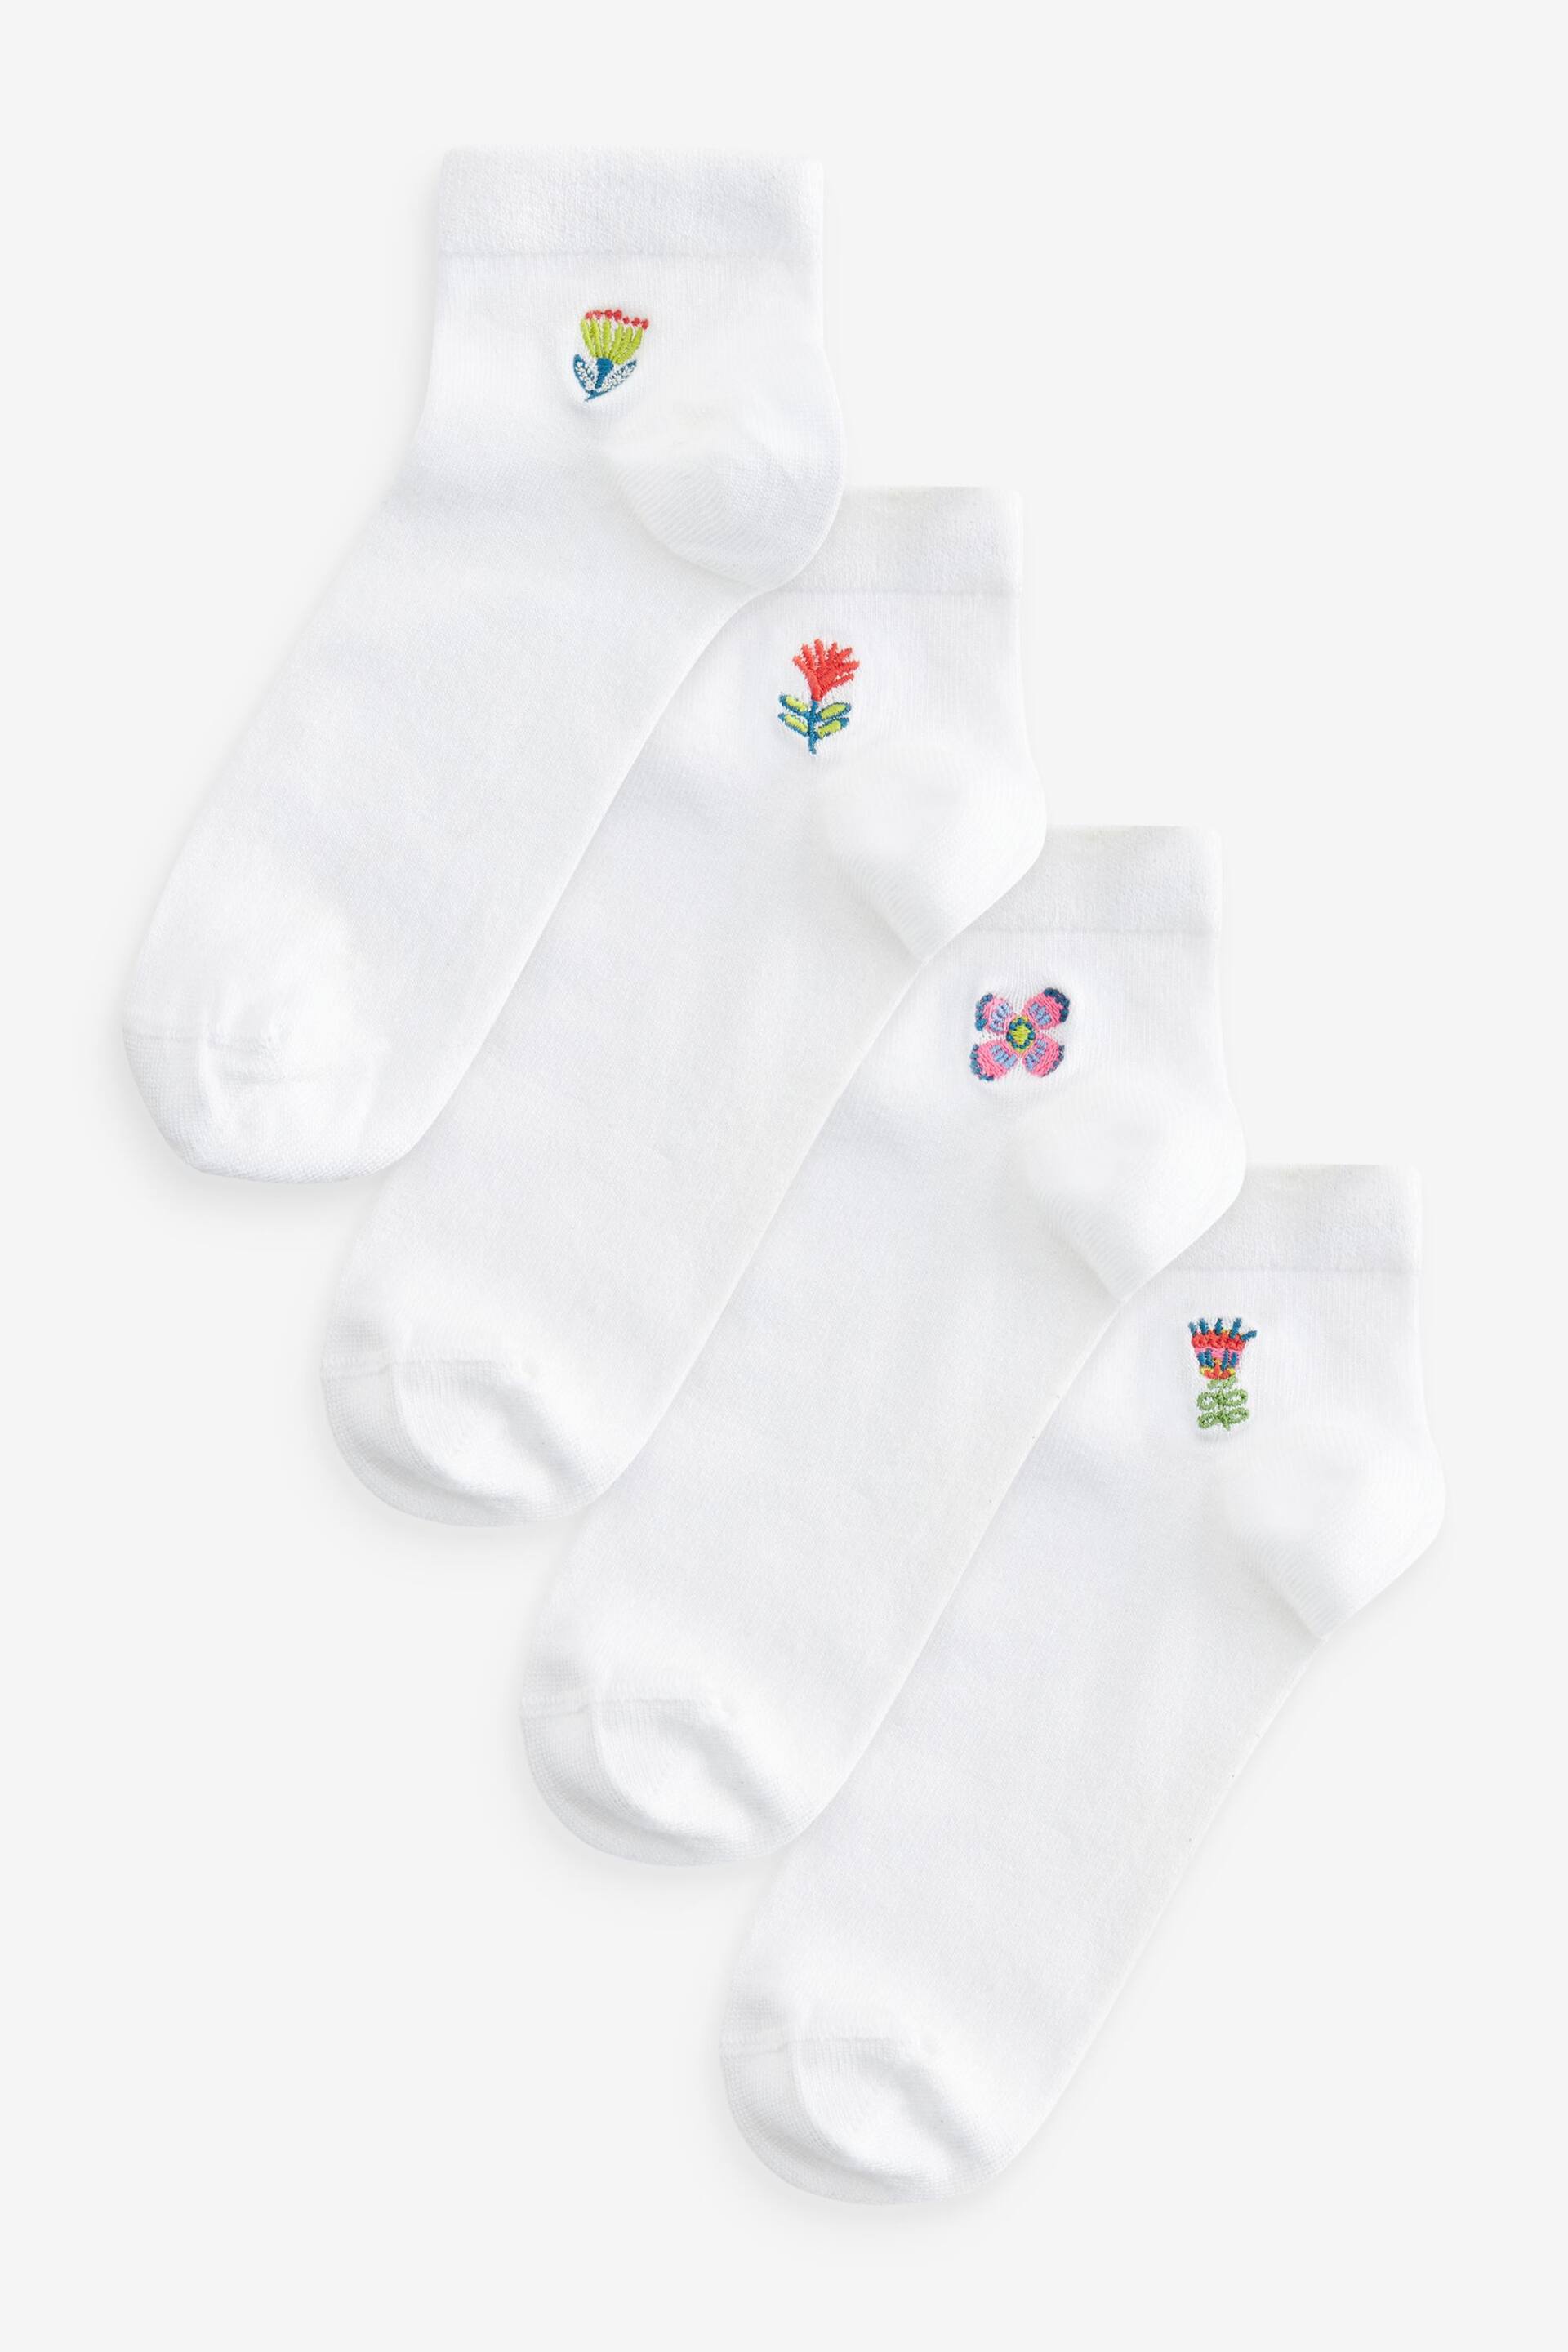 Flower Embroidered Motif White Trainers Socks 4 Pack - Image 1 of 2